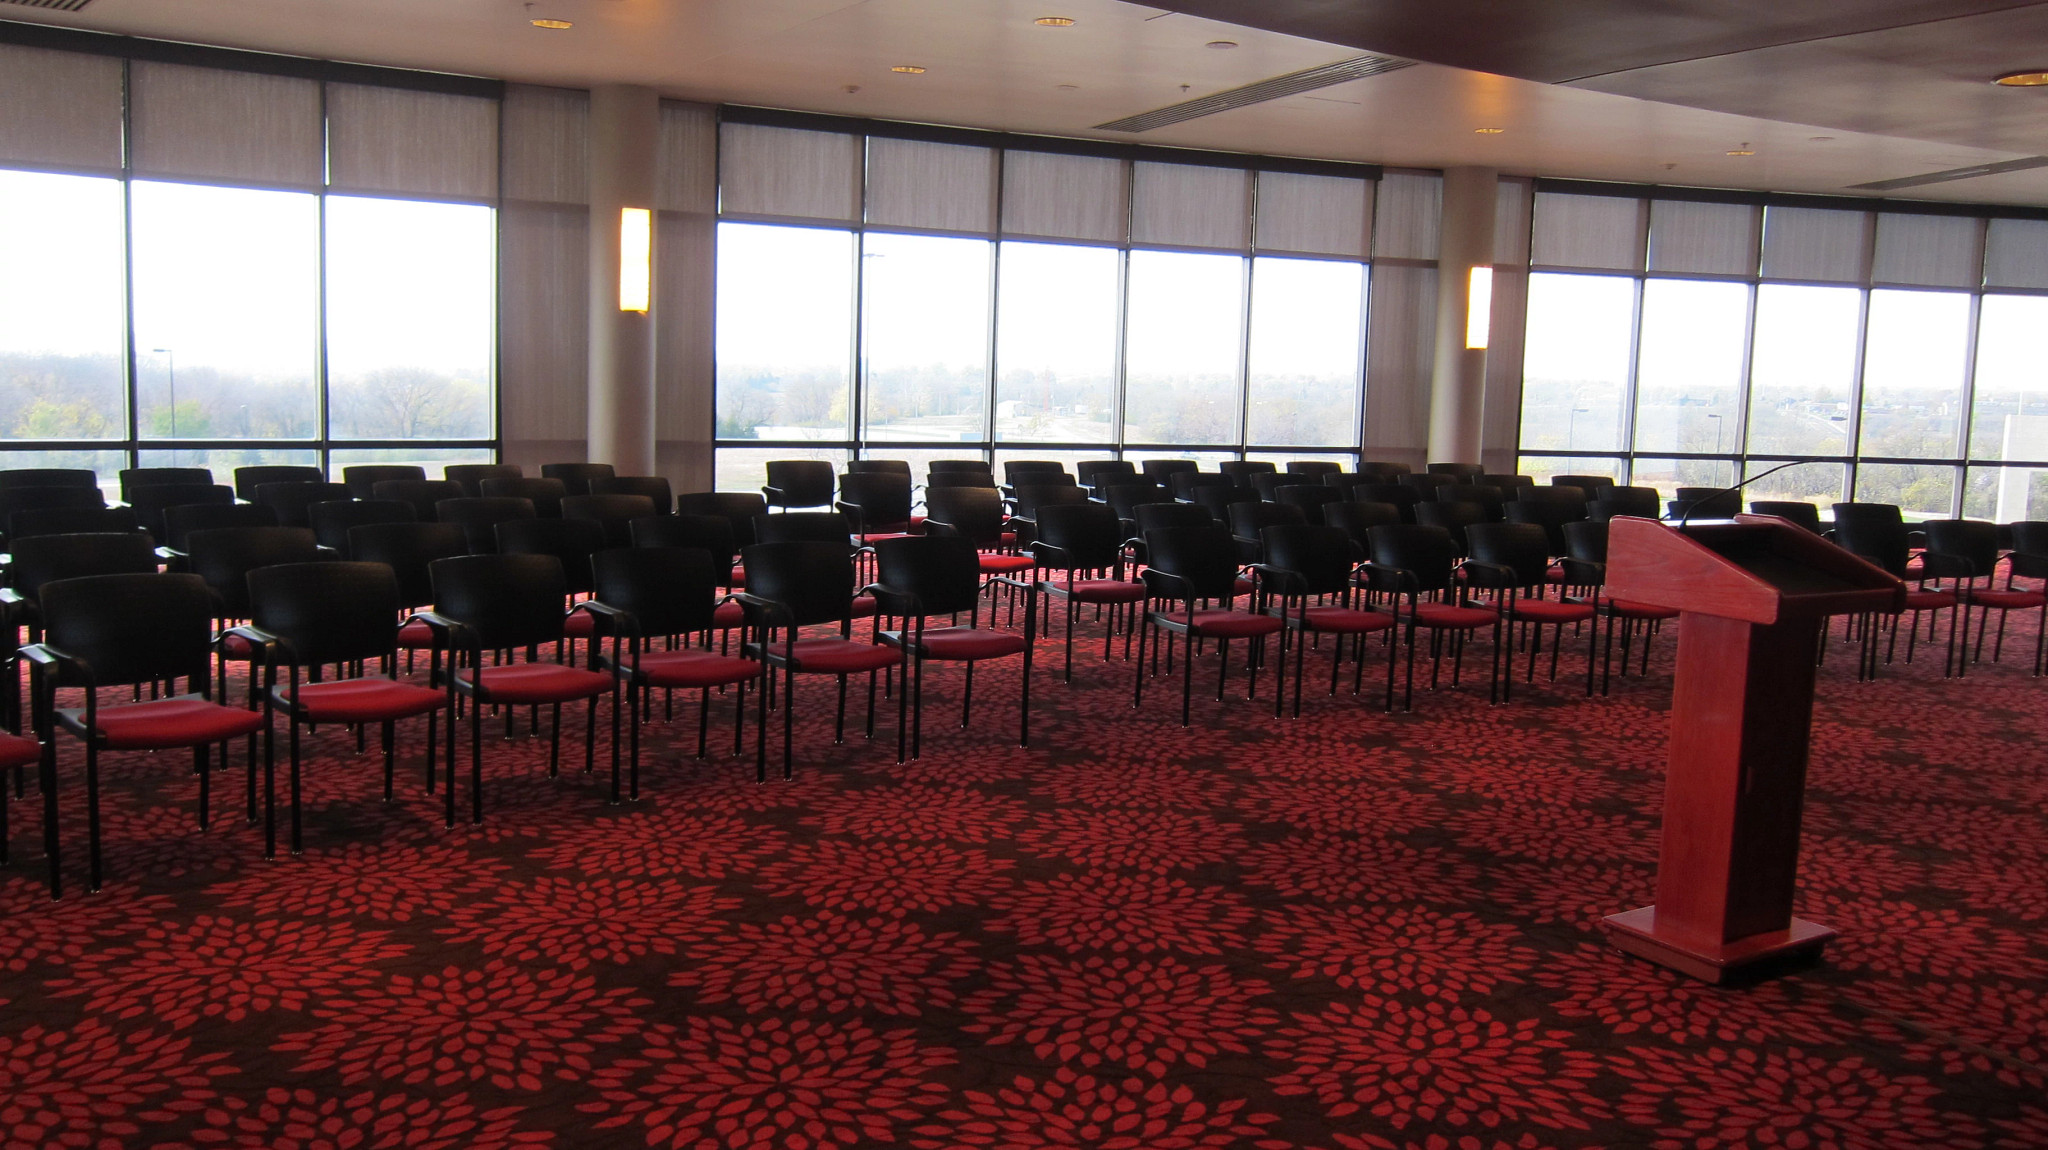 Chairs lined up in rows facing a podium in a large room with a curved wall of windows in the background.